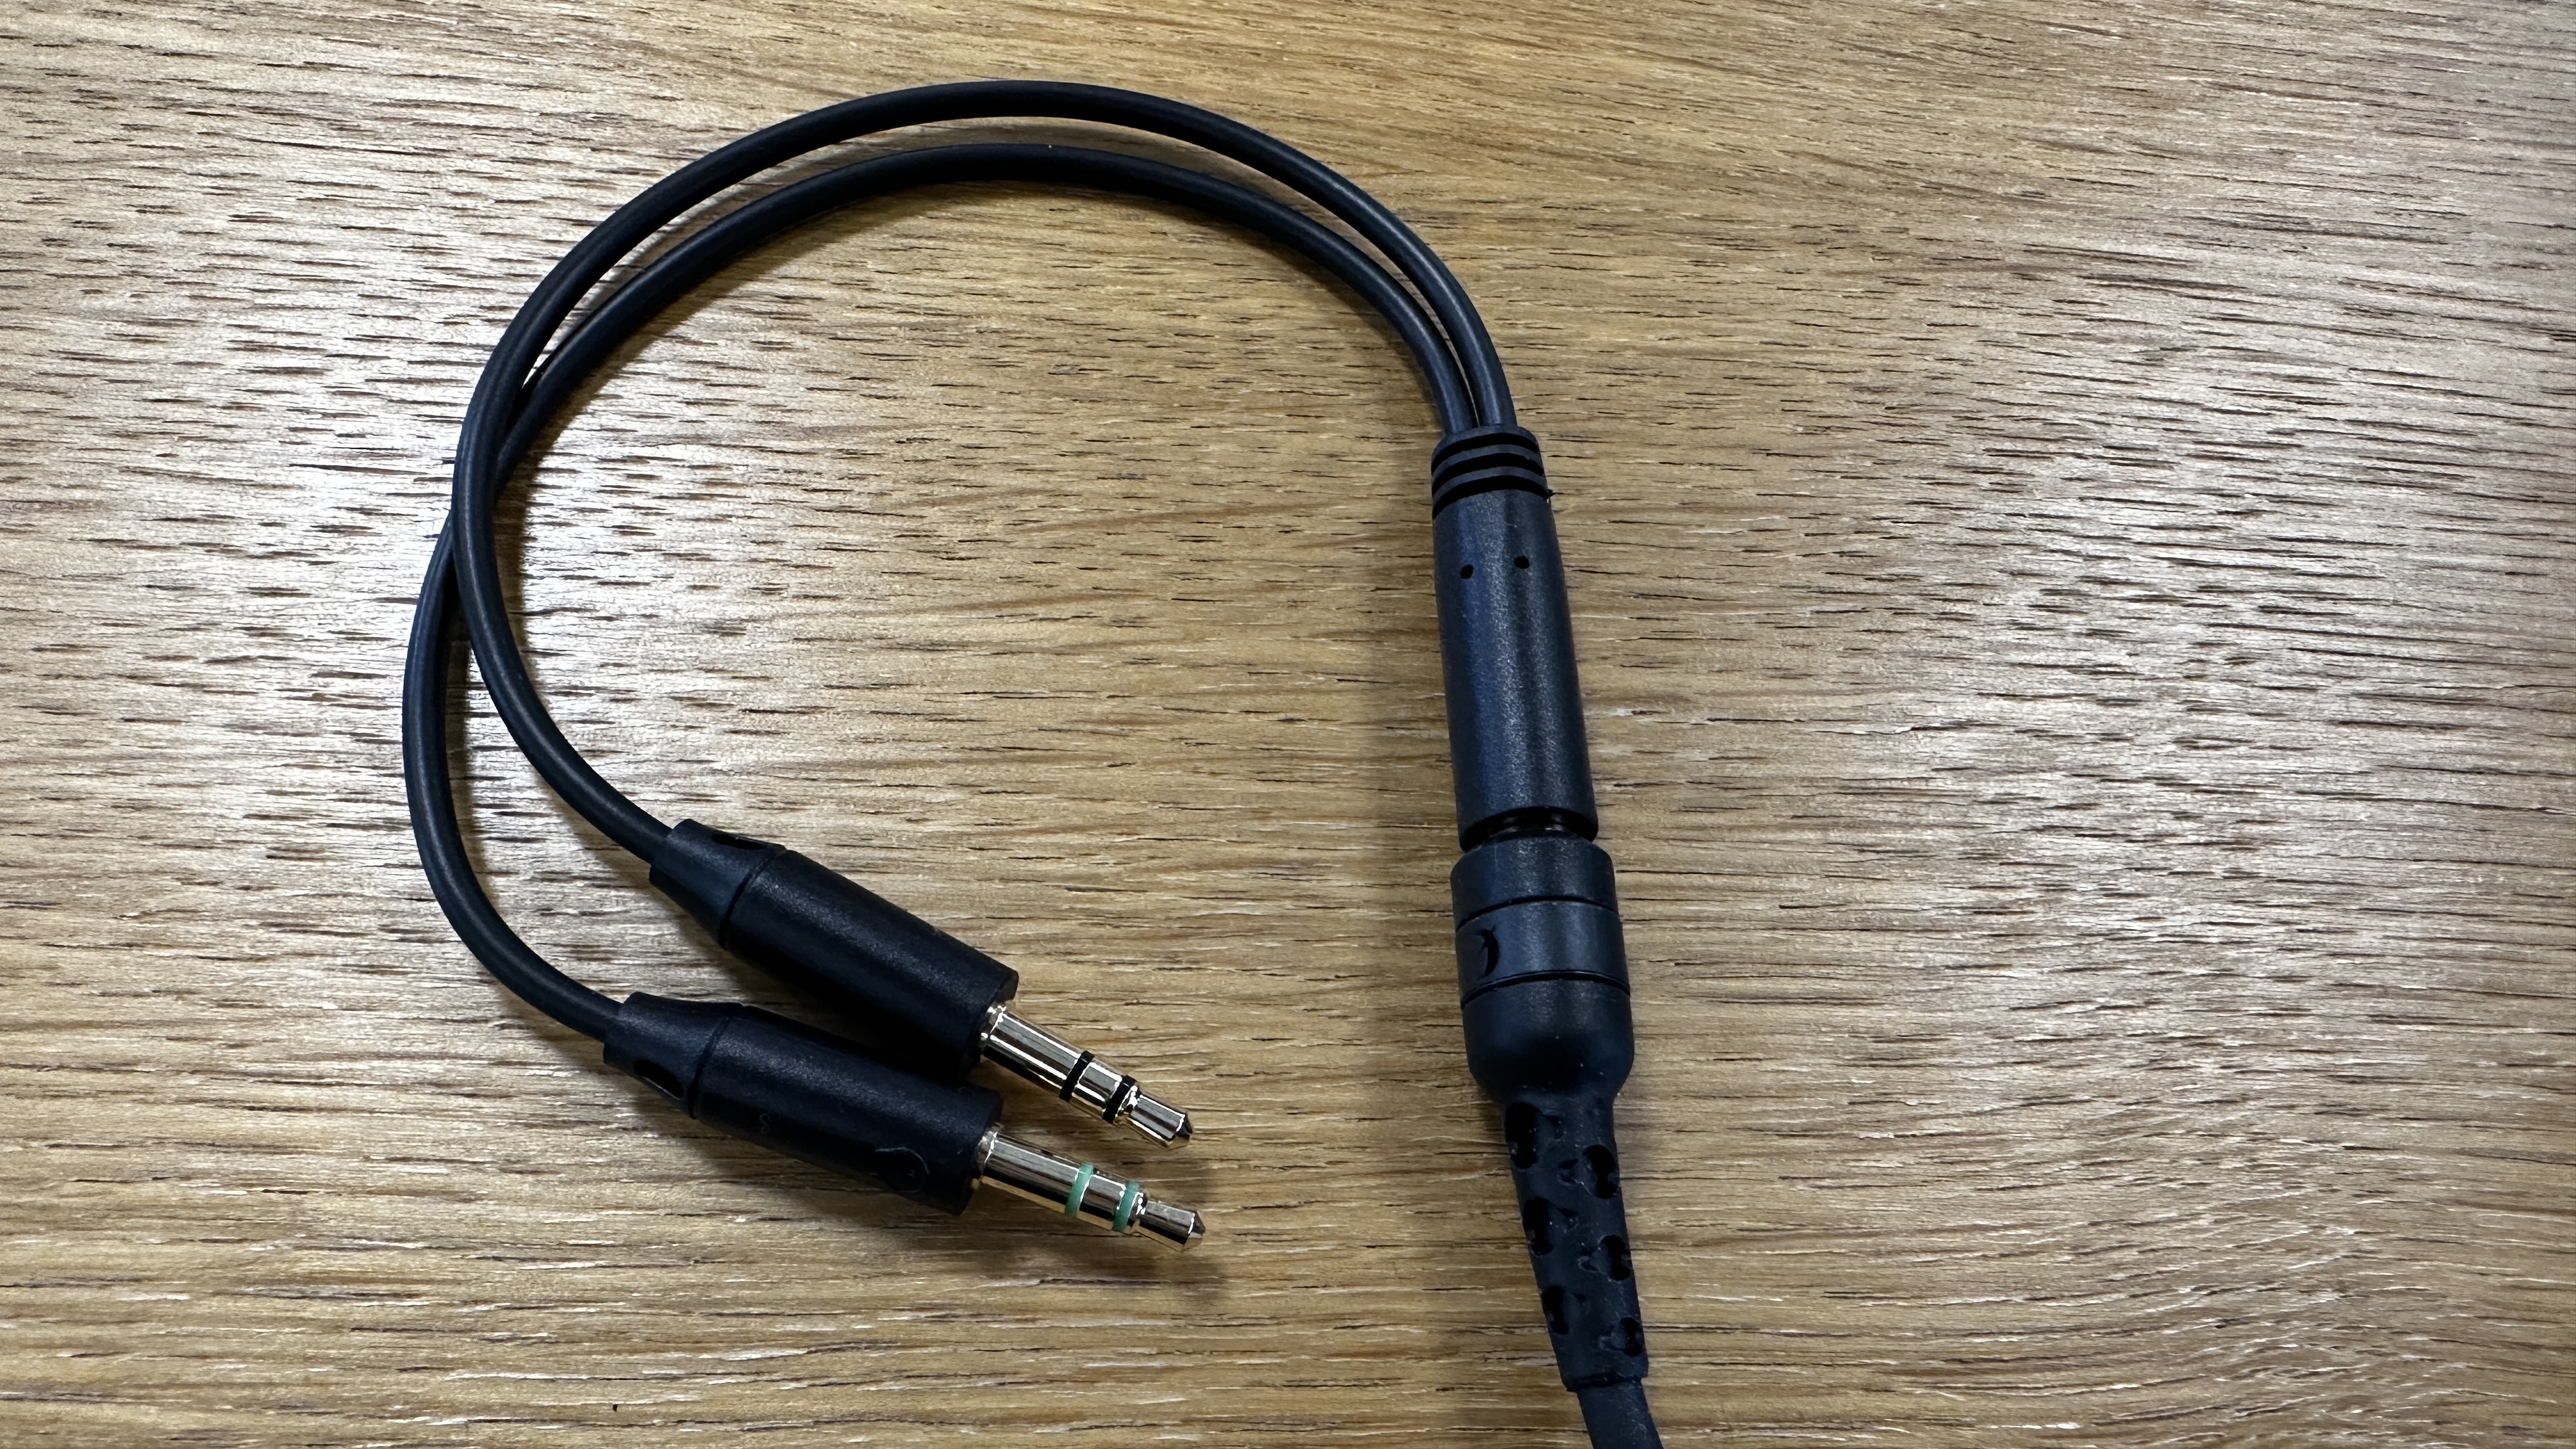 The headphone and microphone splitter for the Rode NTH-100M